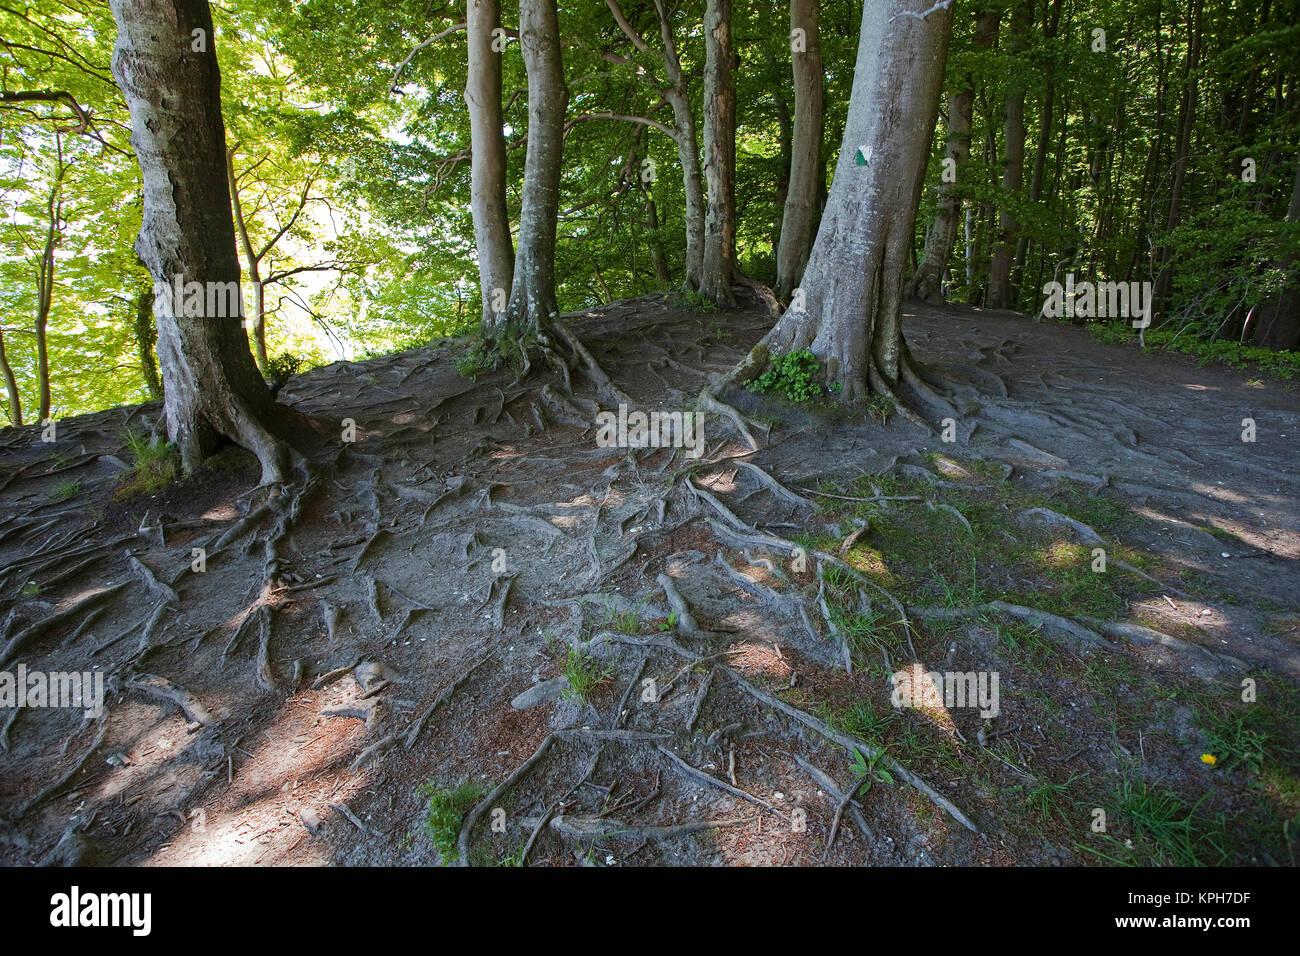 Roots of beeches, forest at the Jasmund National park, Ruegen island, Mecklenburg-Western Pomerania, Baltic Sea, Germany, Europe Stock Photo